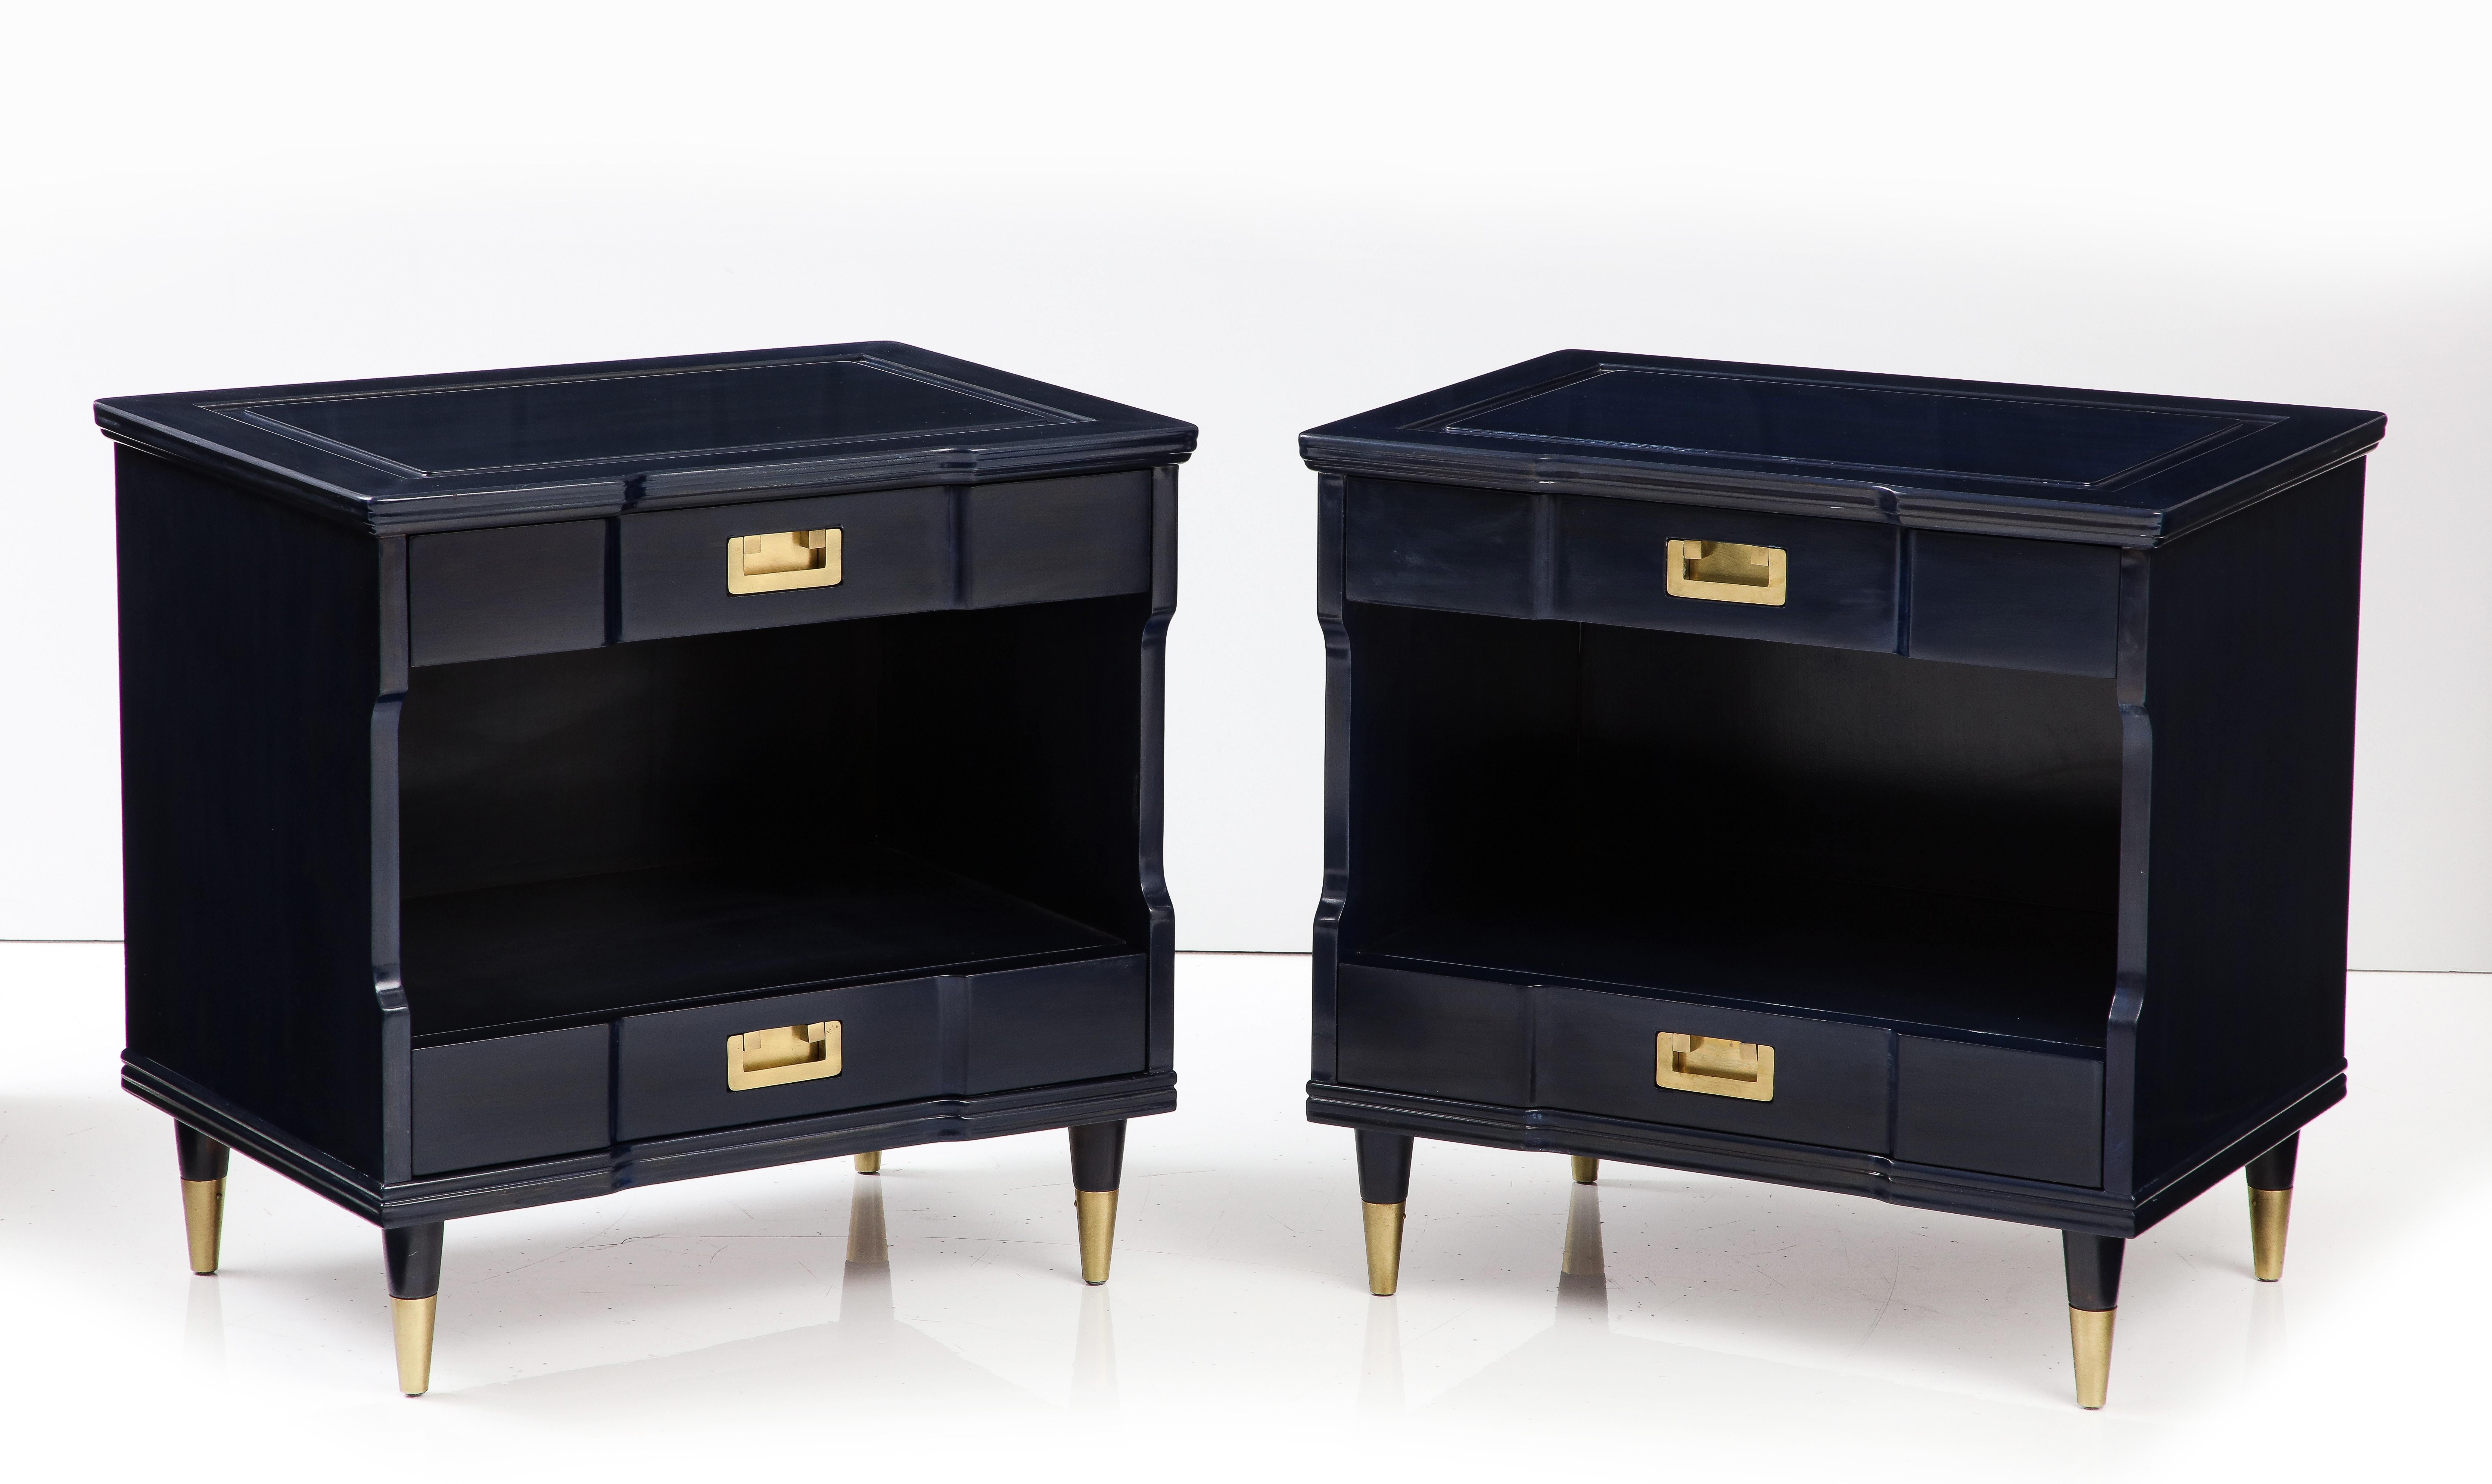 Pair of Mid-Century Modern nightstands featuring a custom stain color in a dark sapphire/midnight blue and brushed solid brass hardware and sabots. Night stands have 2 drawers, upper drawer stamped John Widdicomb Co.